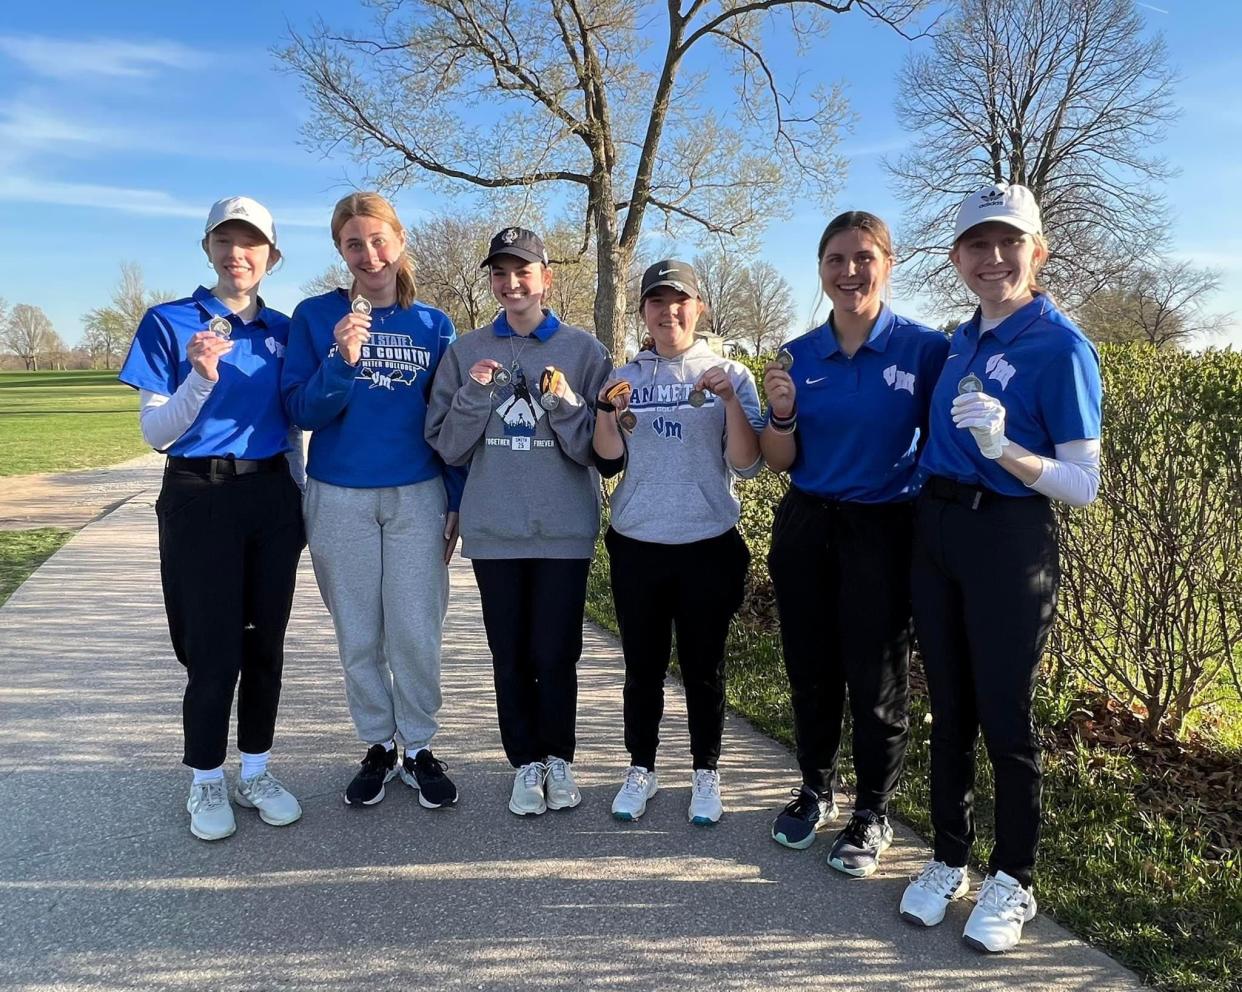 The Van Meter girls golf team poses for a photo after placing second during a tournament on Monday, April 17, 2023, at Lakeview Country Club in Winterset.